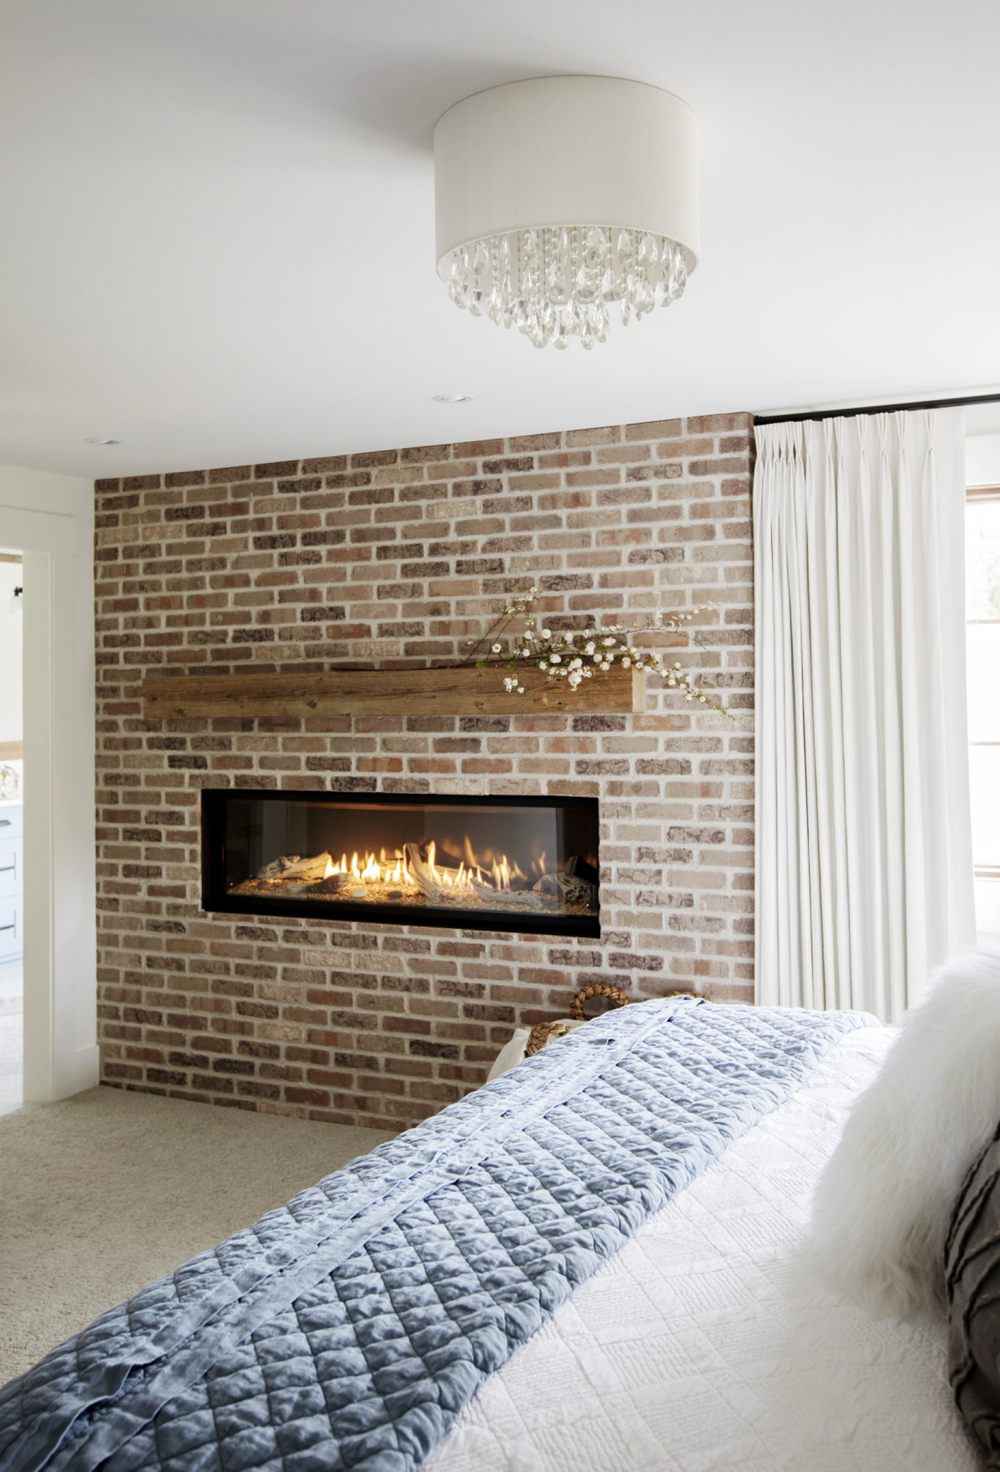 A bedroom with exposed brick wall and gas fireplace